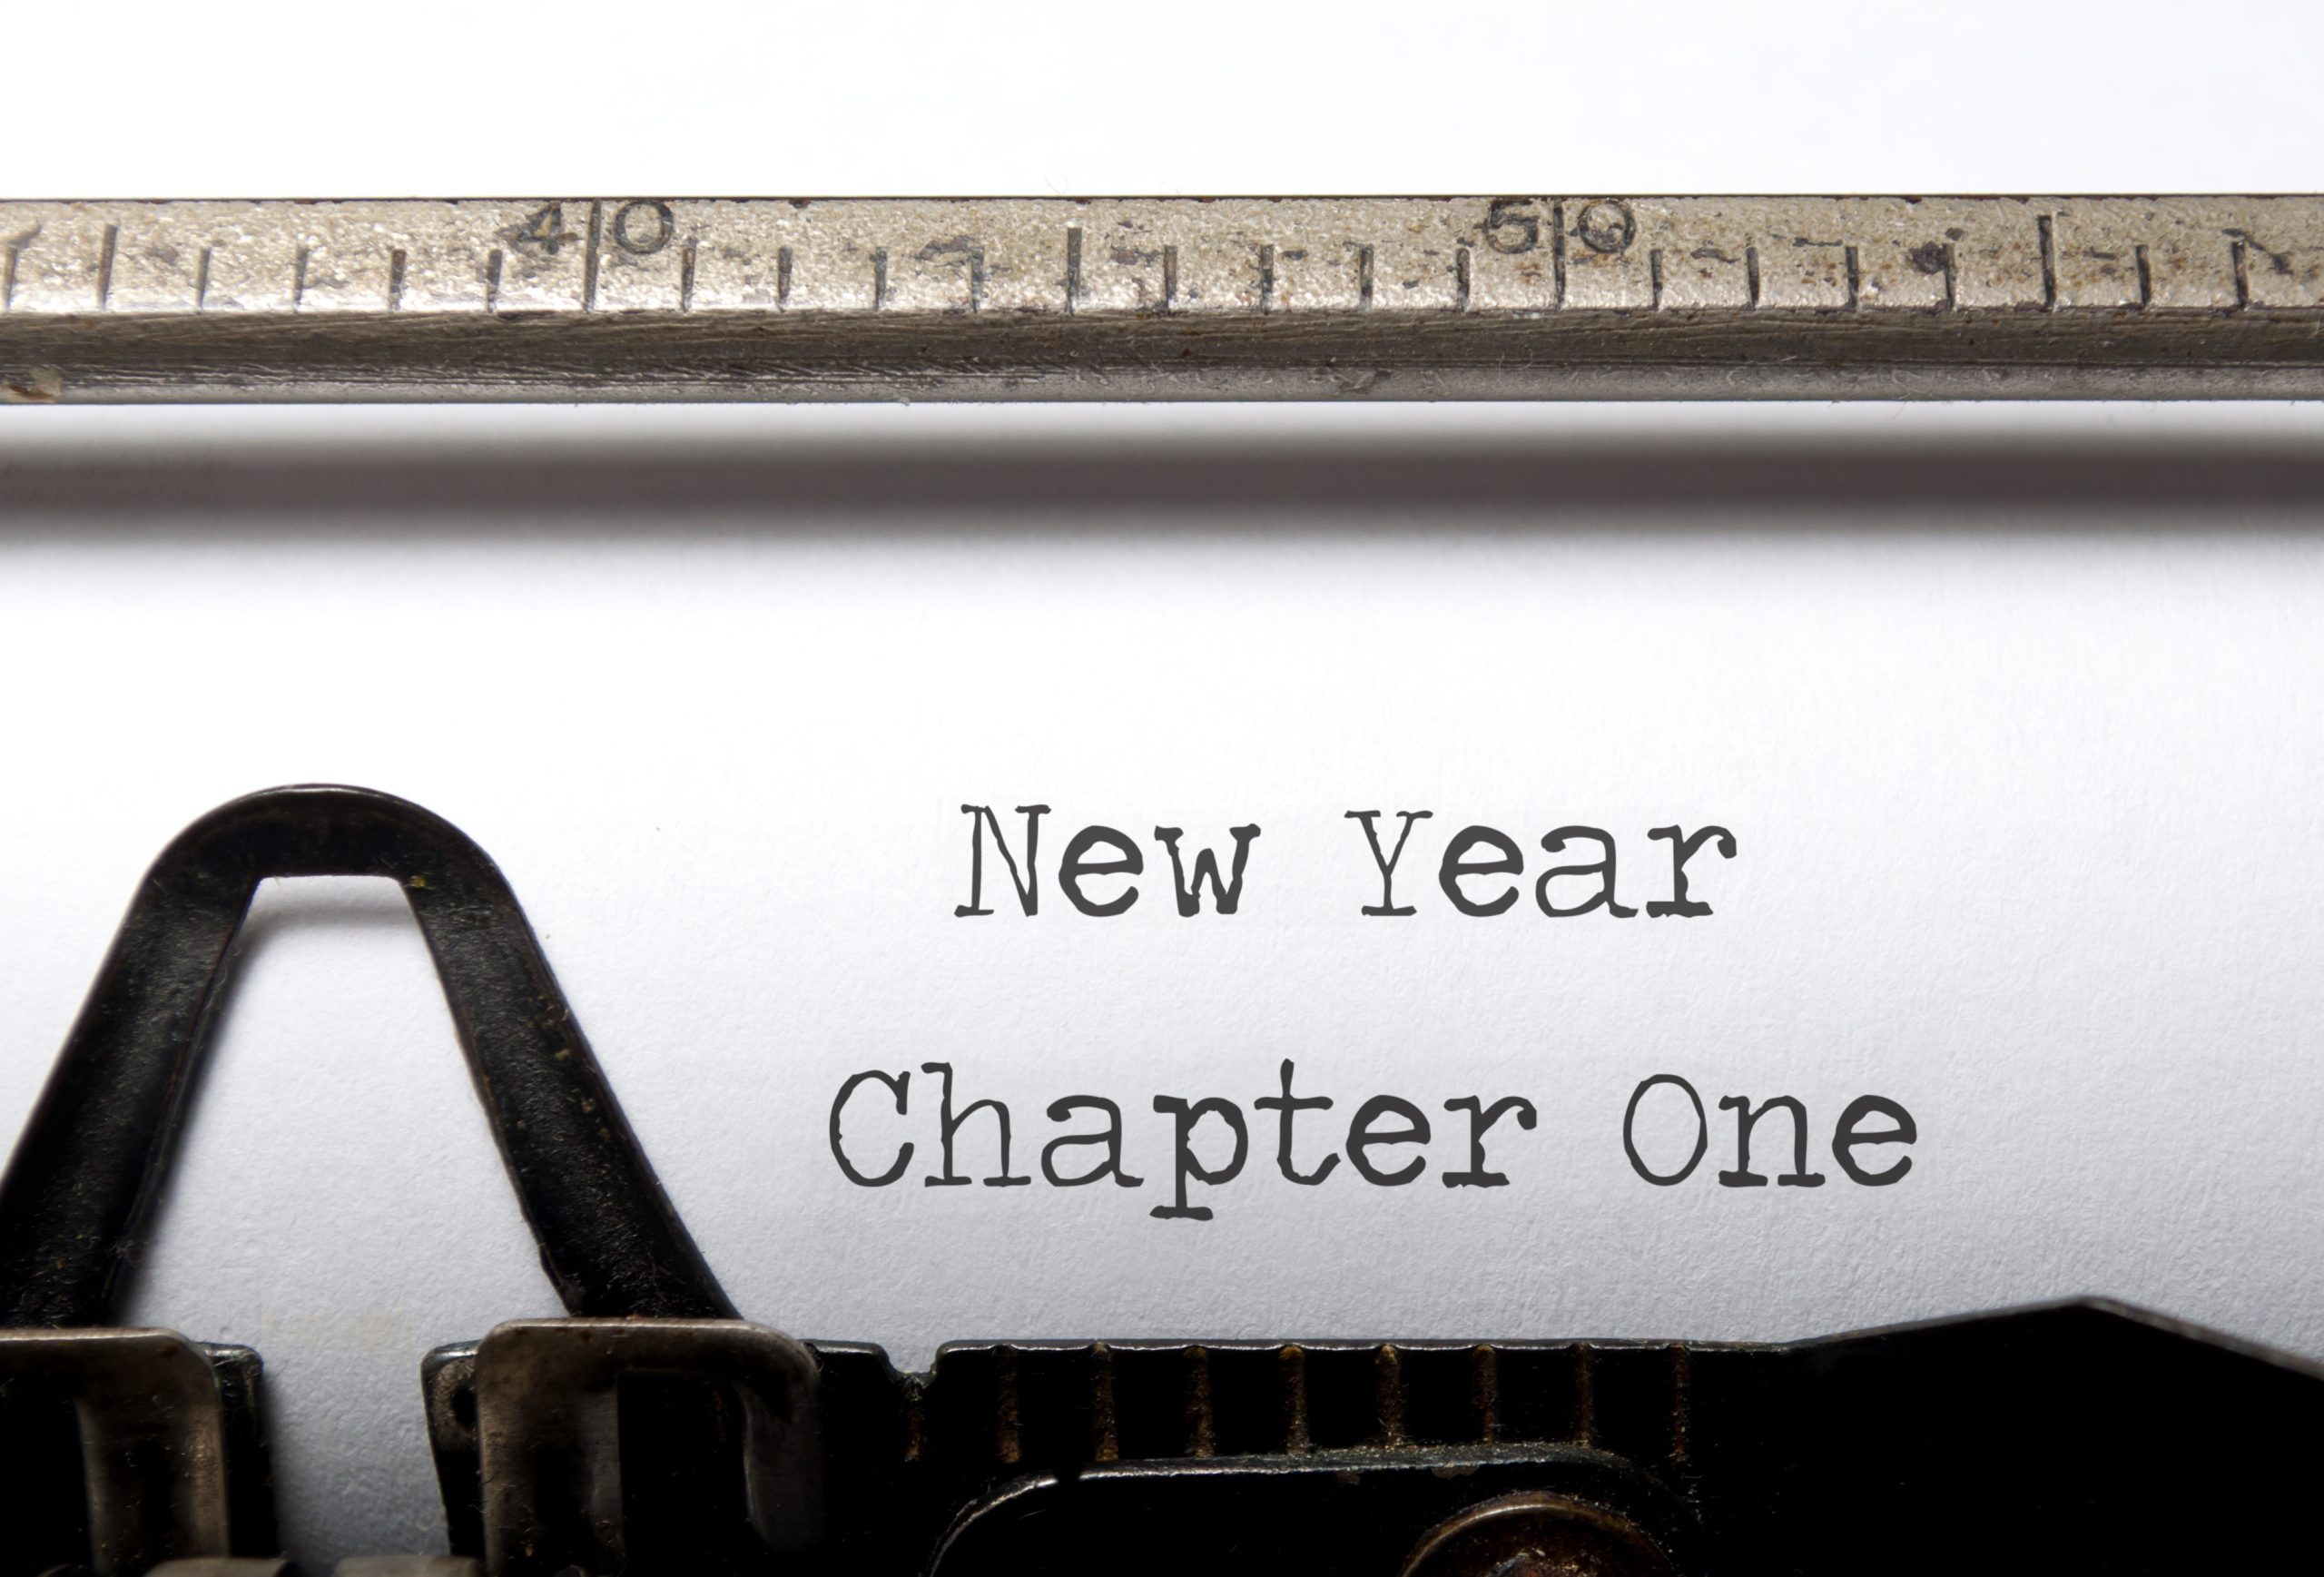 Close up on a page in a typewriter that says "New Year: Chapter One"